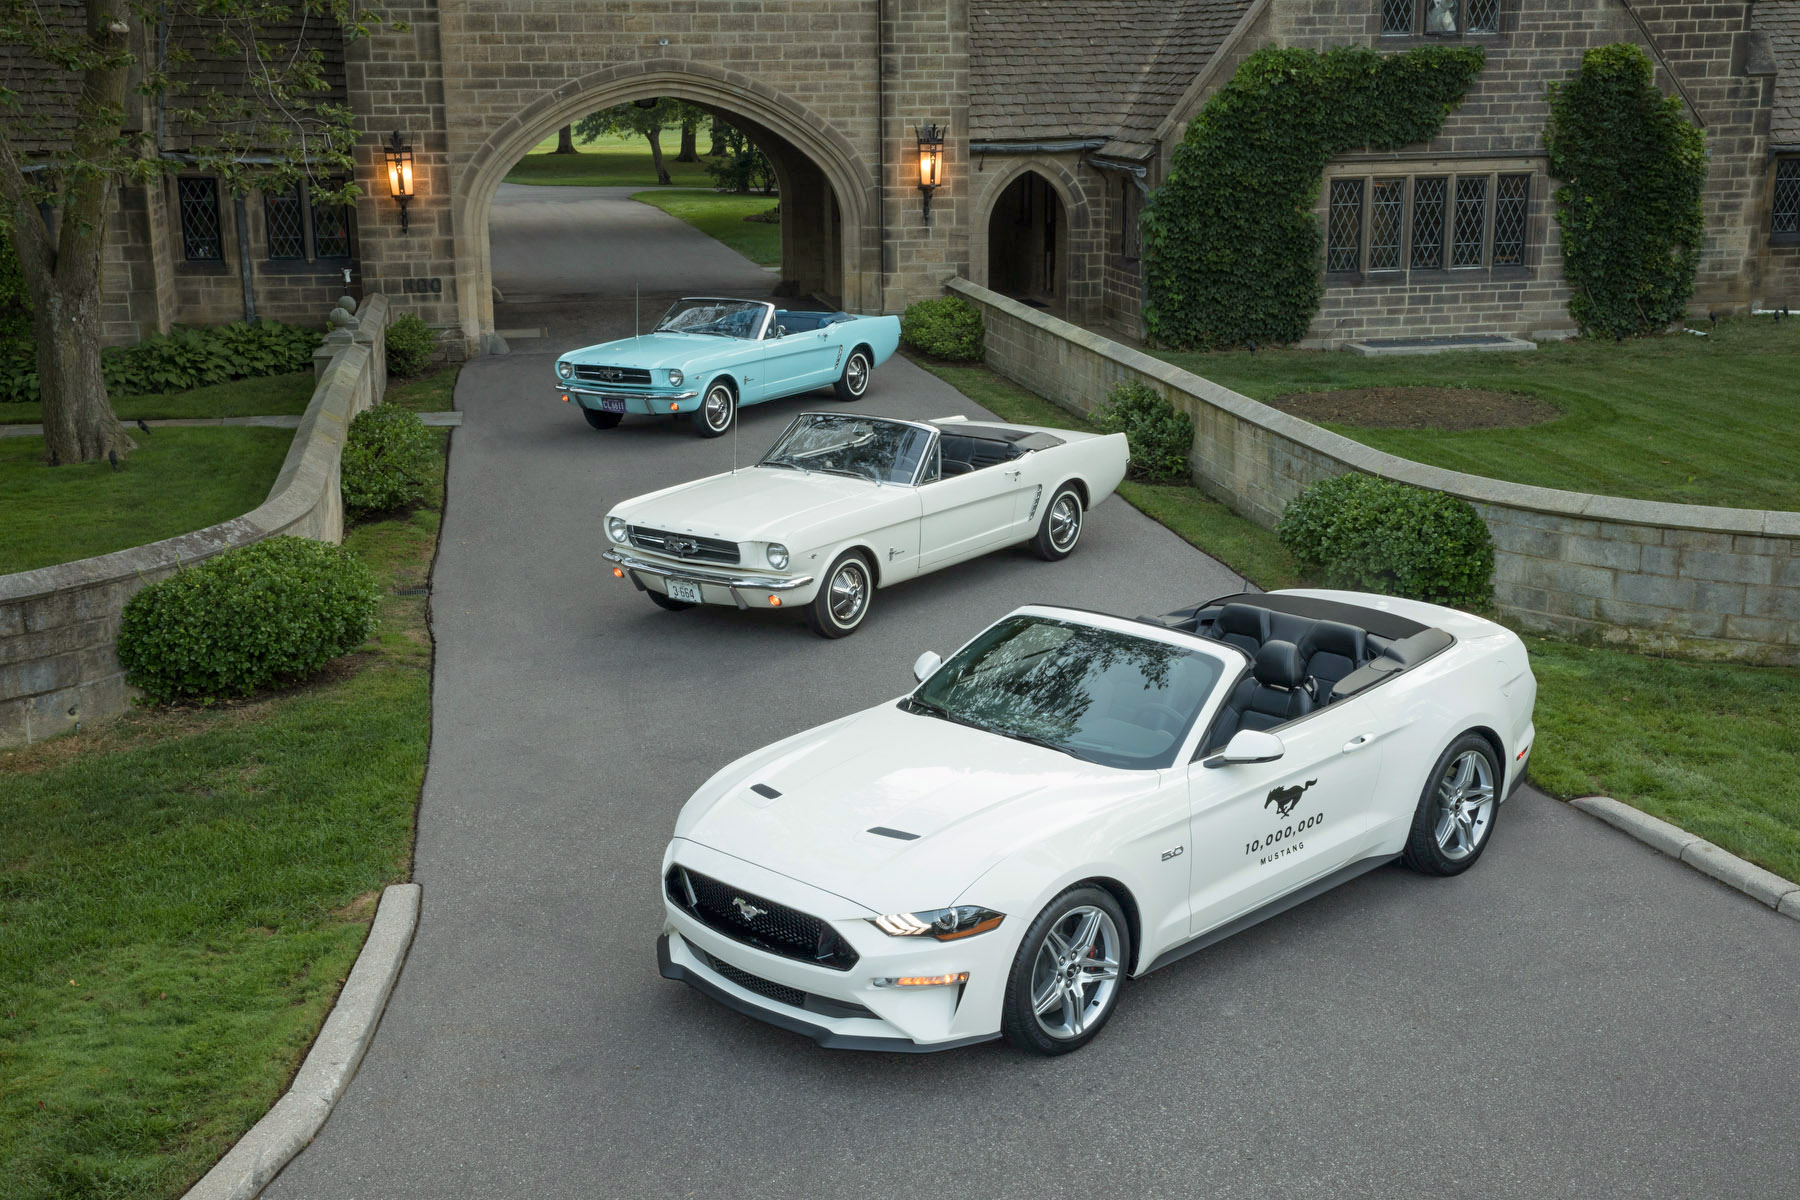 The first Mustang bought, the ceremonial VIN 1 first Mustang, and the 10-millionth Mustang on the grounds of the Edsel  Eleanor Ford House.